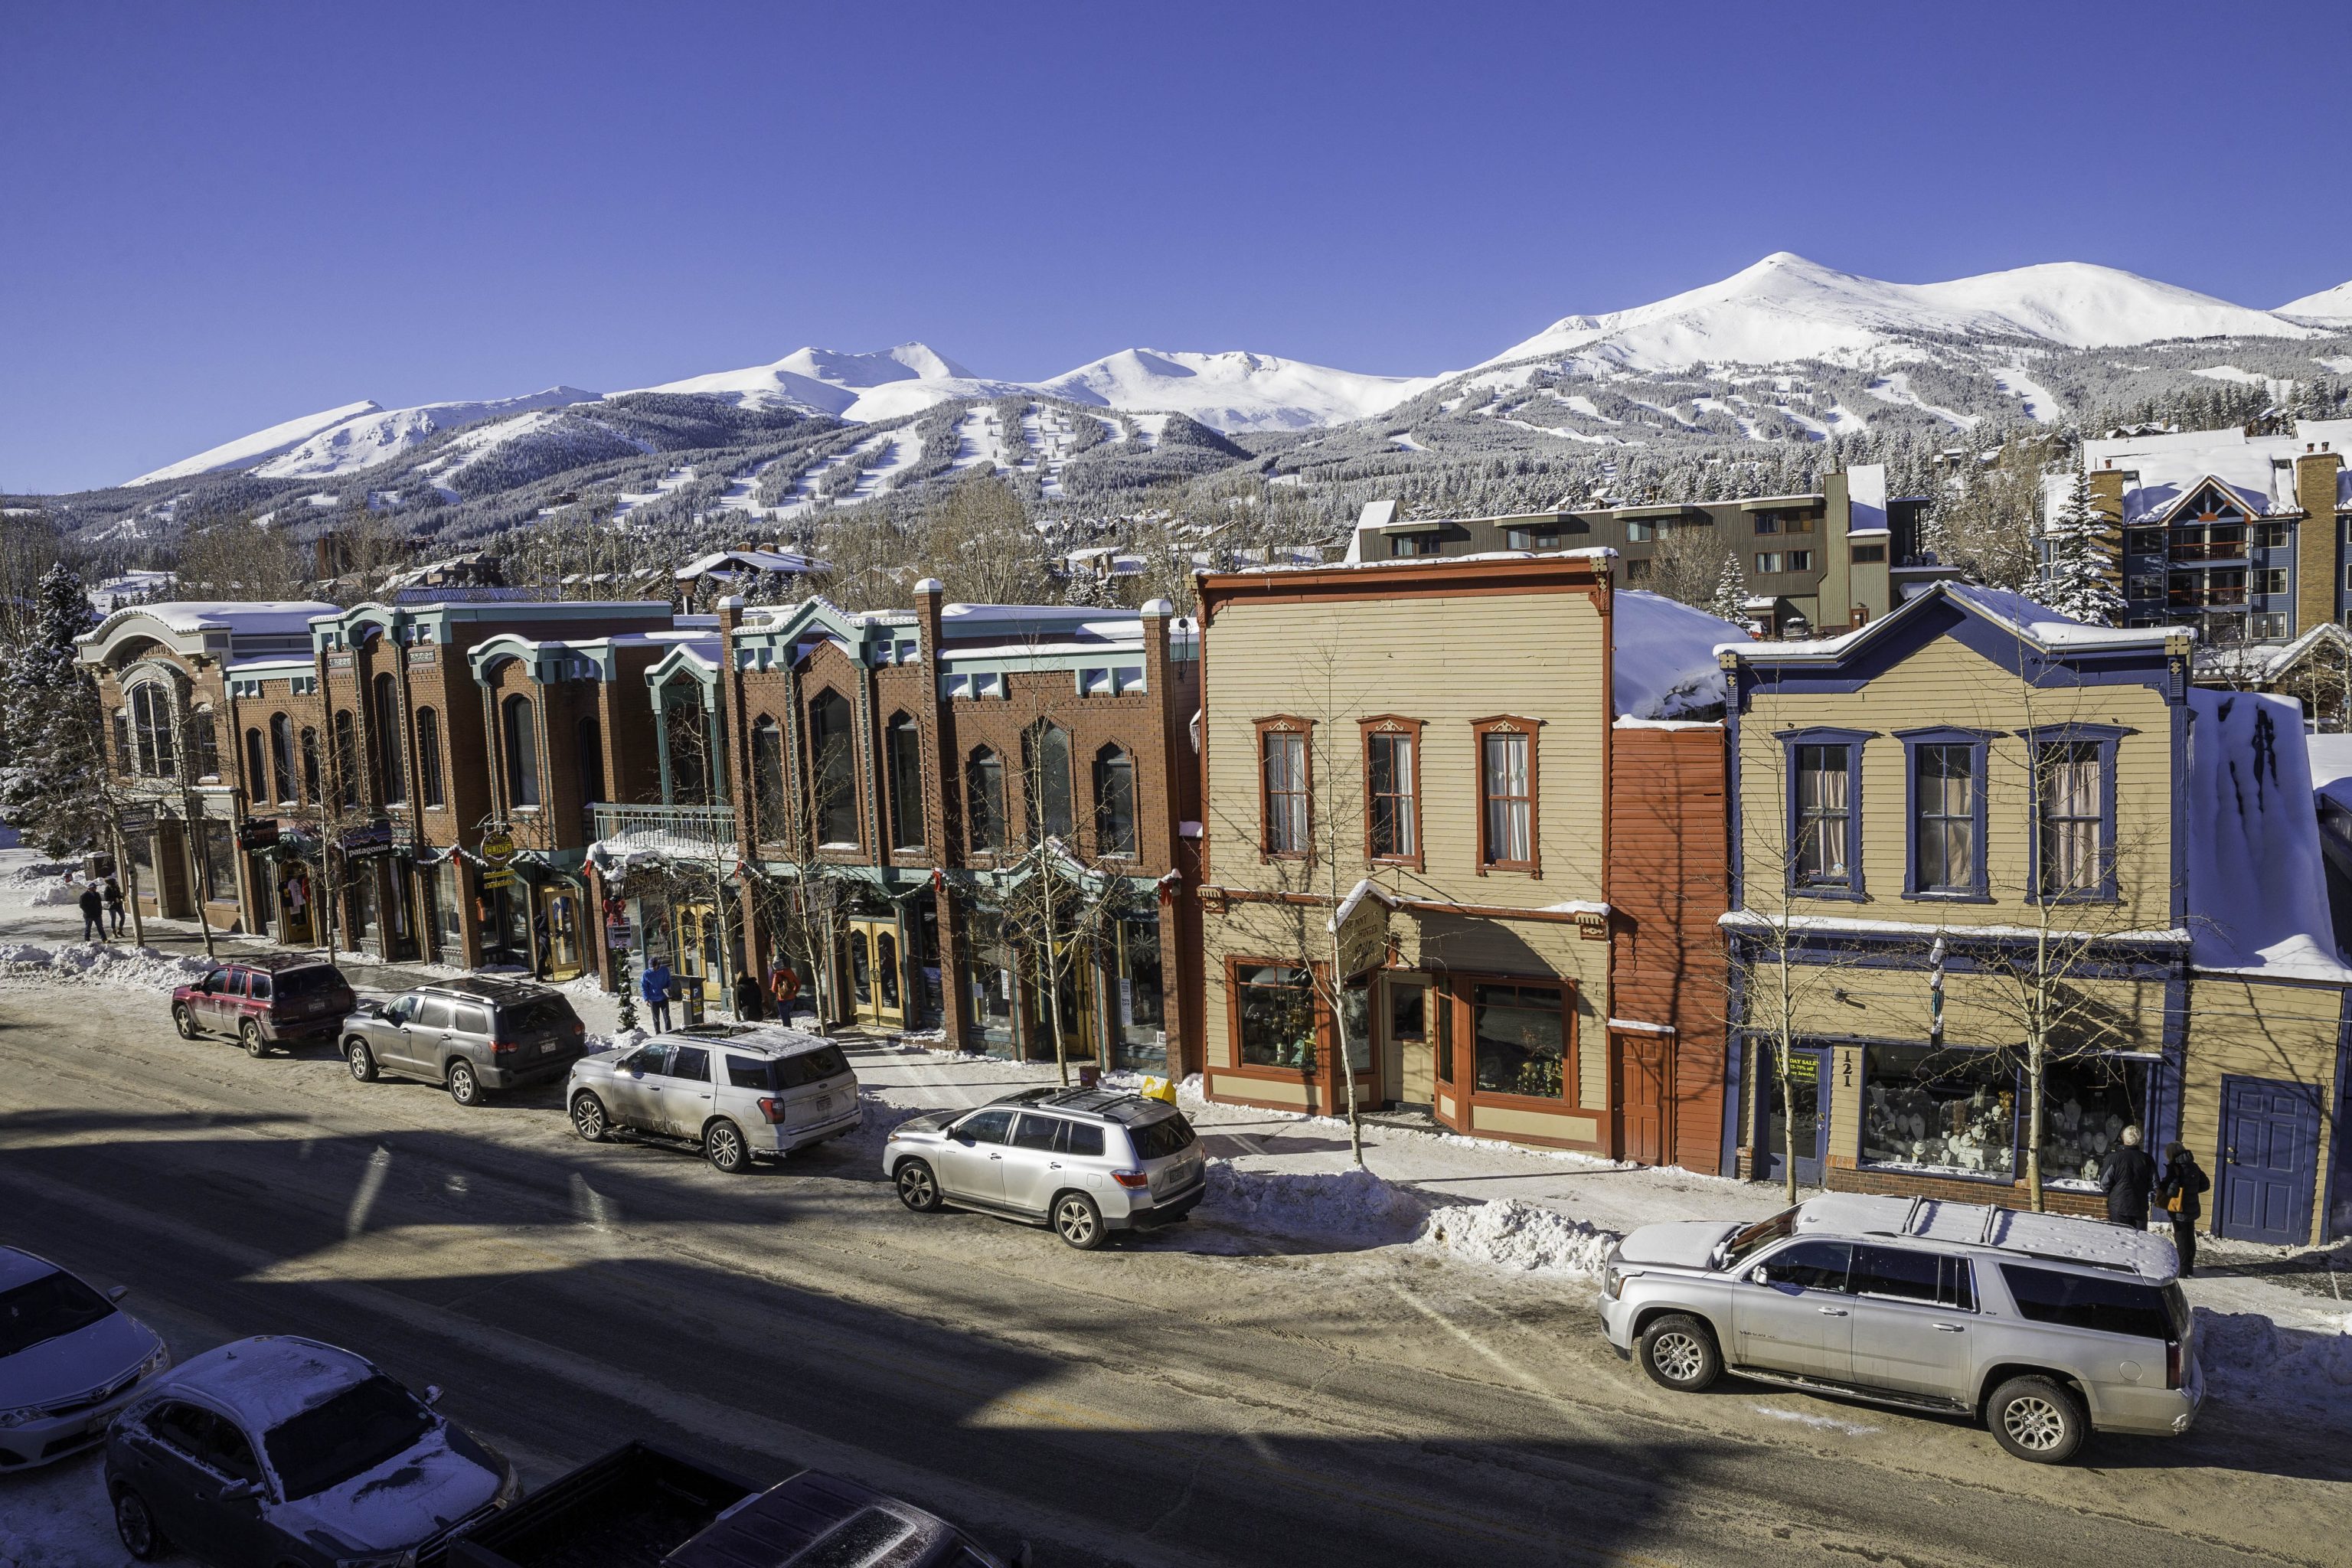 Breckenridge winter views of downtown and mountains